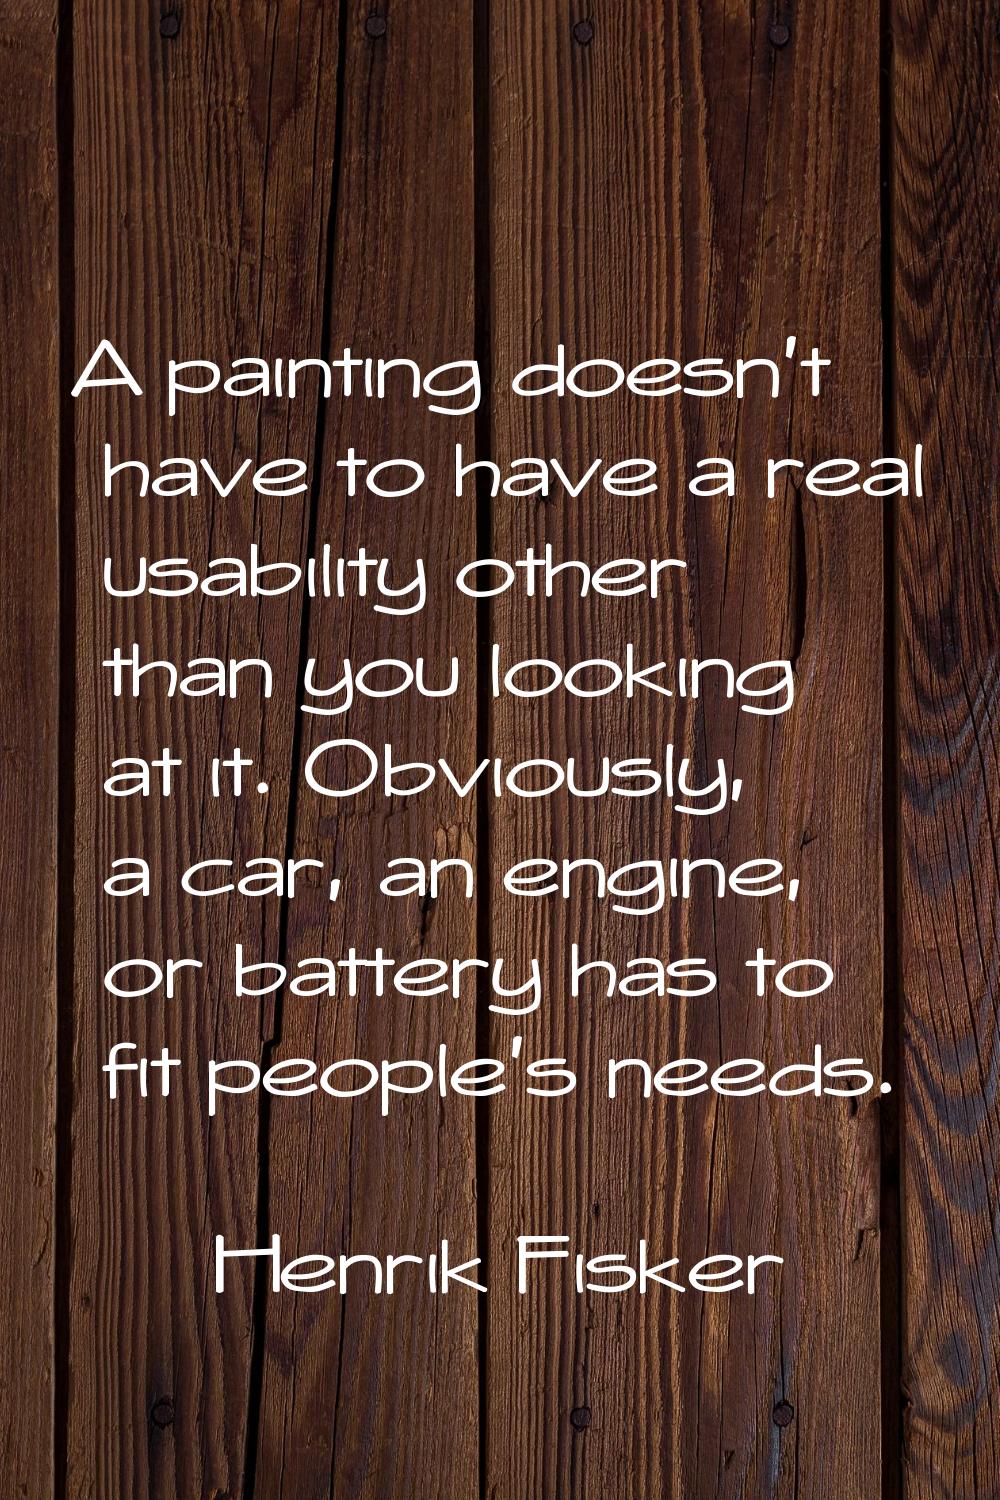 A painting doesn't have to have a real usability other than you looking at it. Obviously, a car, an